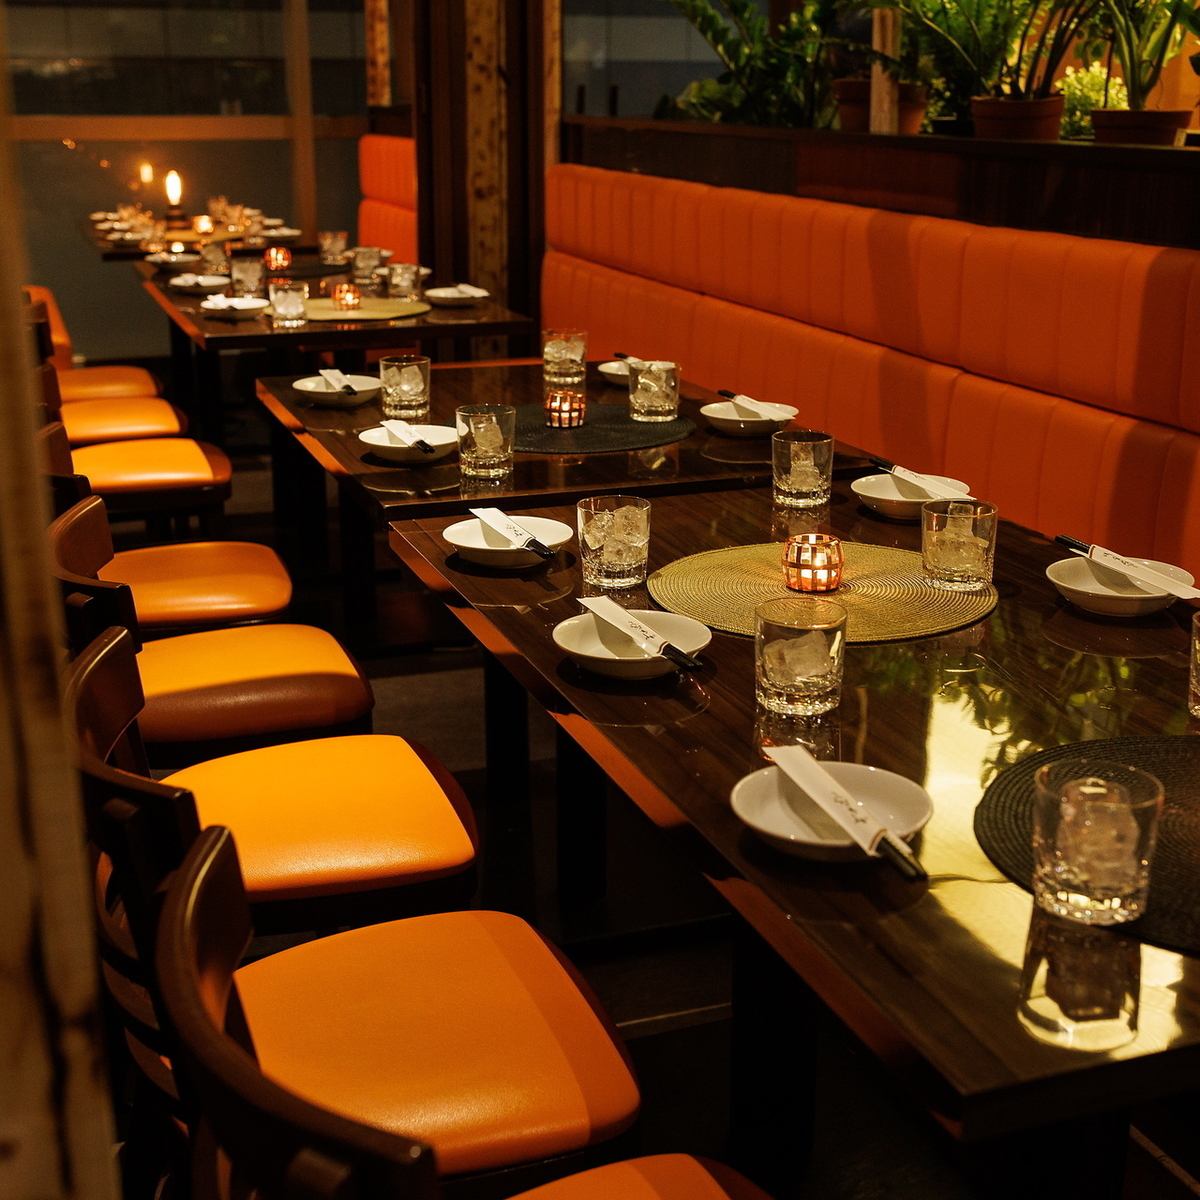 It is also possible to reserve the entire restaurant for company banquets, welcome parties, farewell parties, etc.